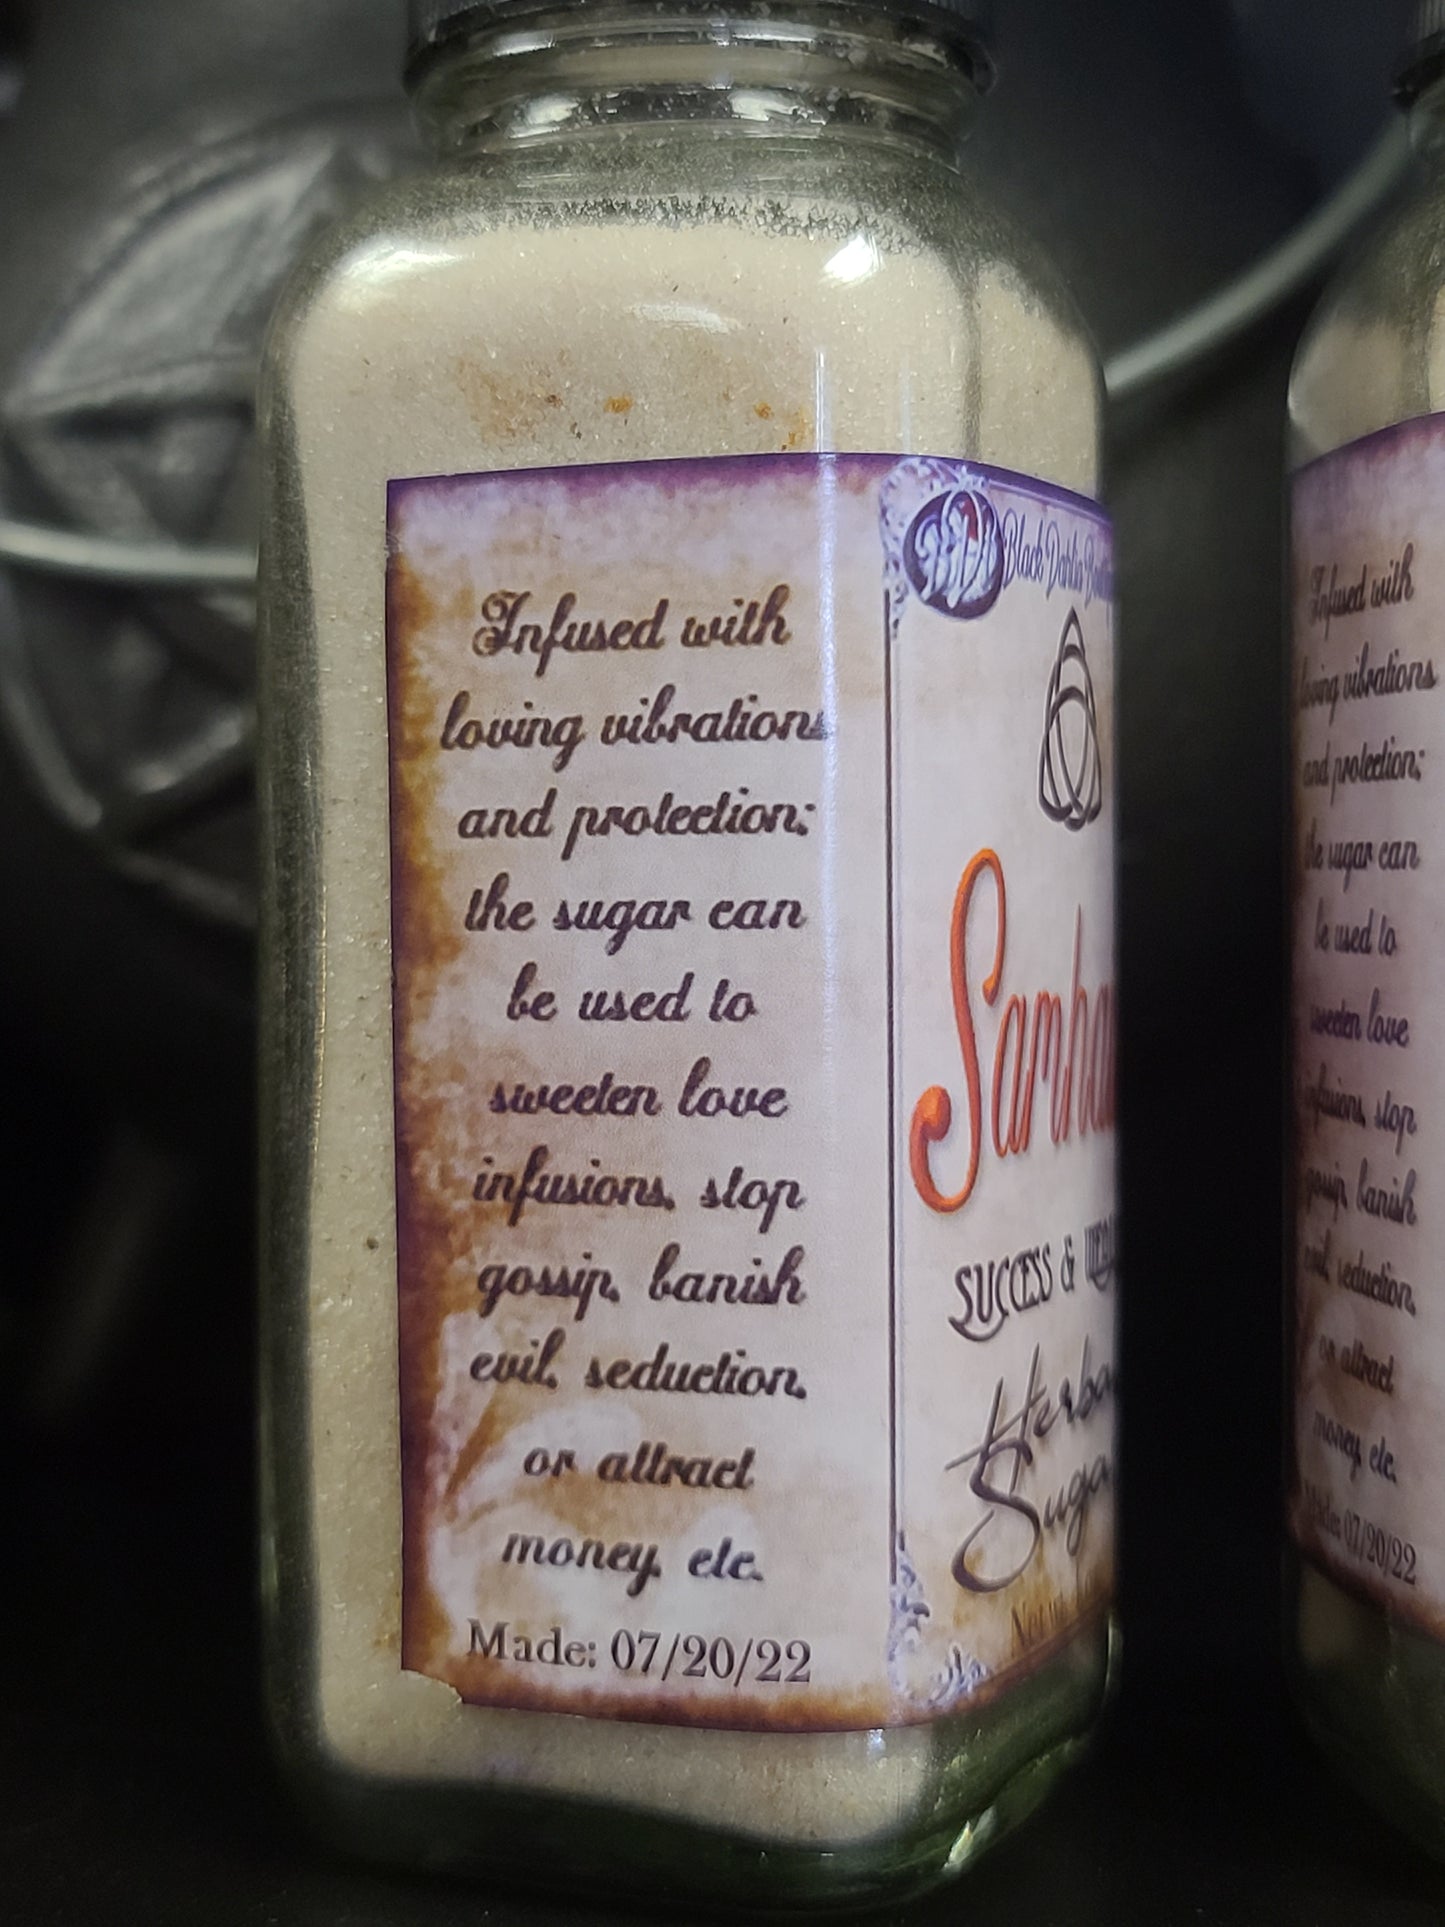 Samhain Herbal Sugar for Success & Wealth *Limited Edition*